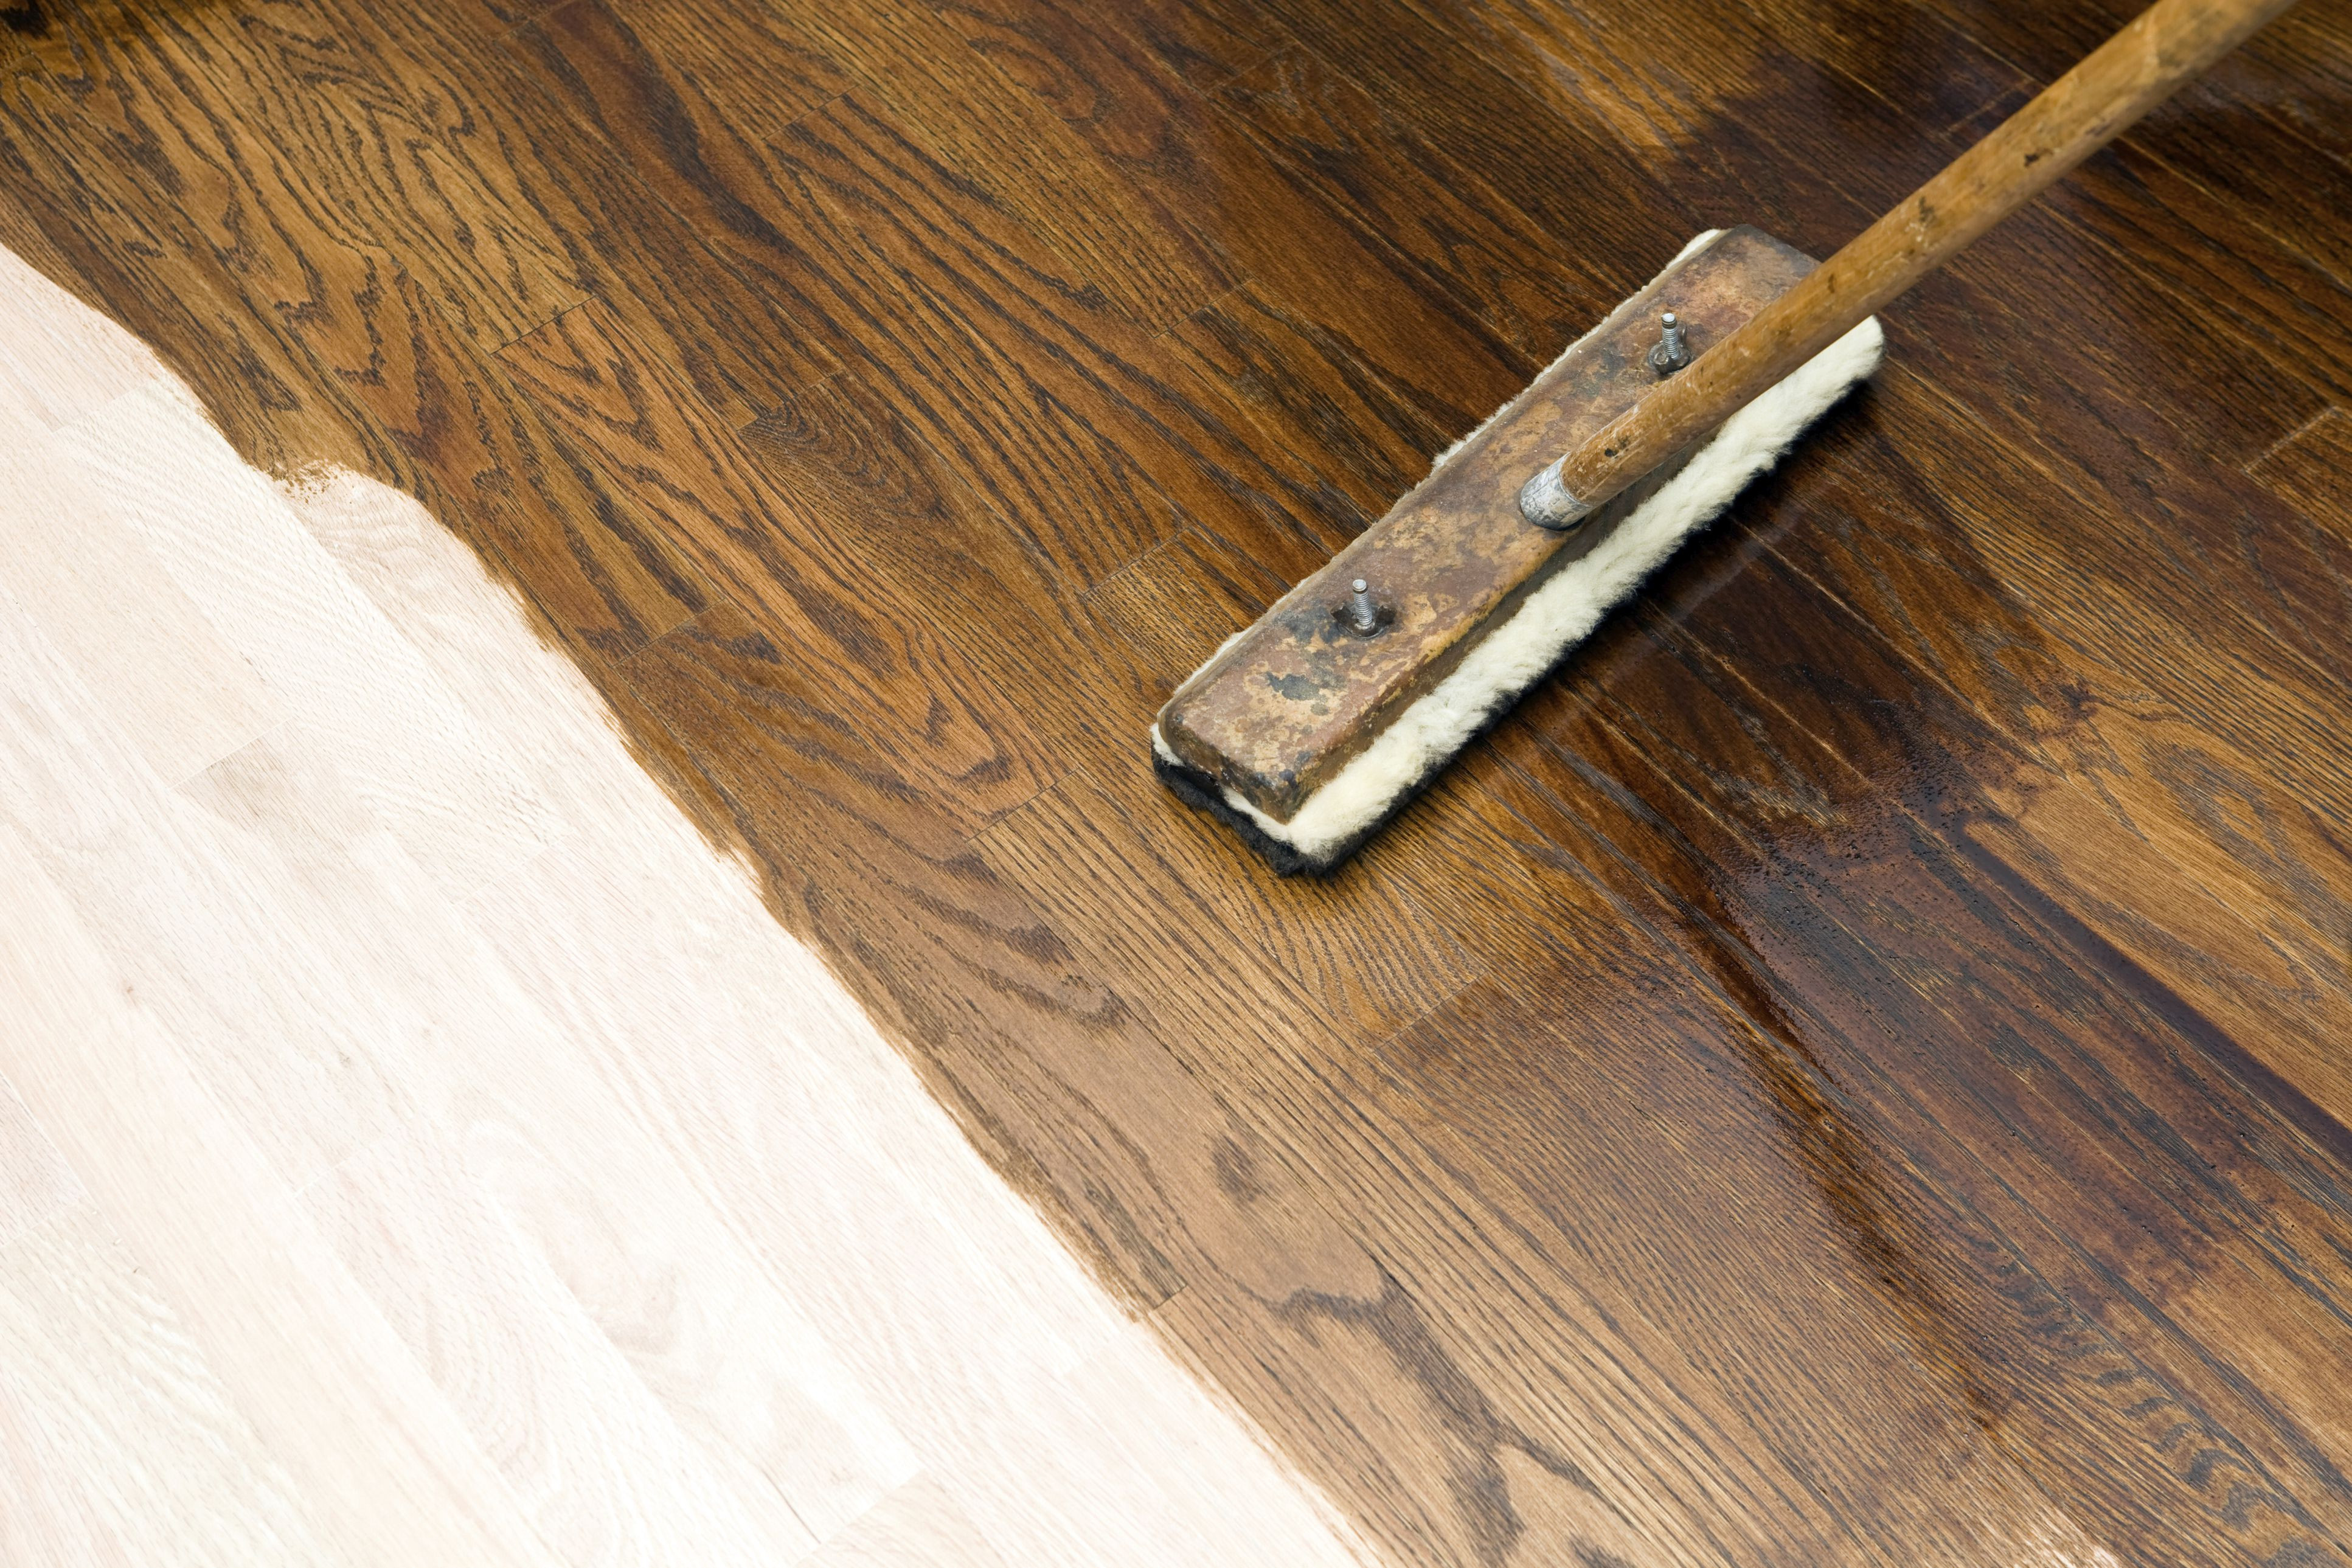 how much does a new hardwood floor cost of how to build equity what it means to own more of your home for dark stain application on new oak hardwood floor 184881406 573e139f5f9b58723d7a472d